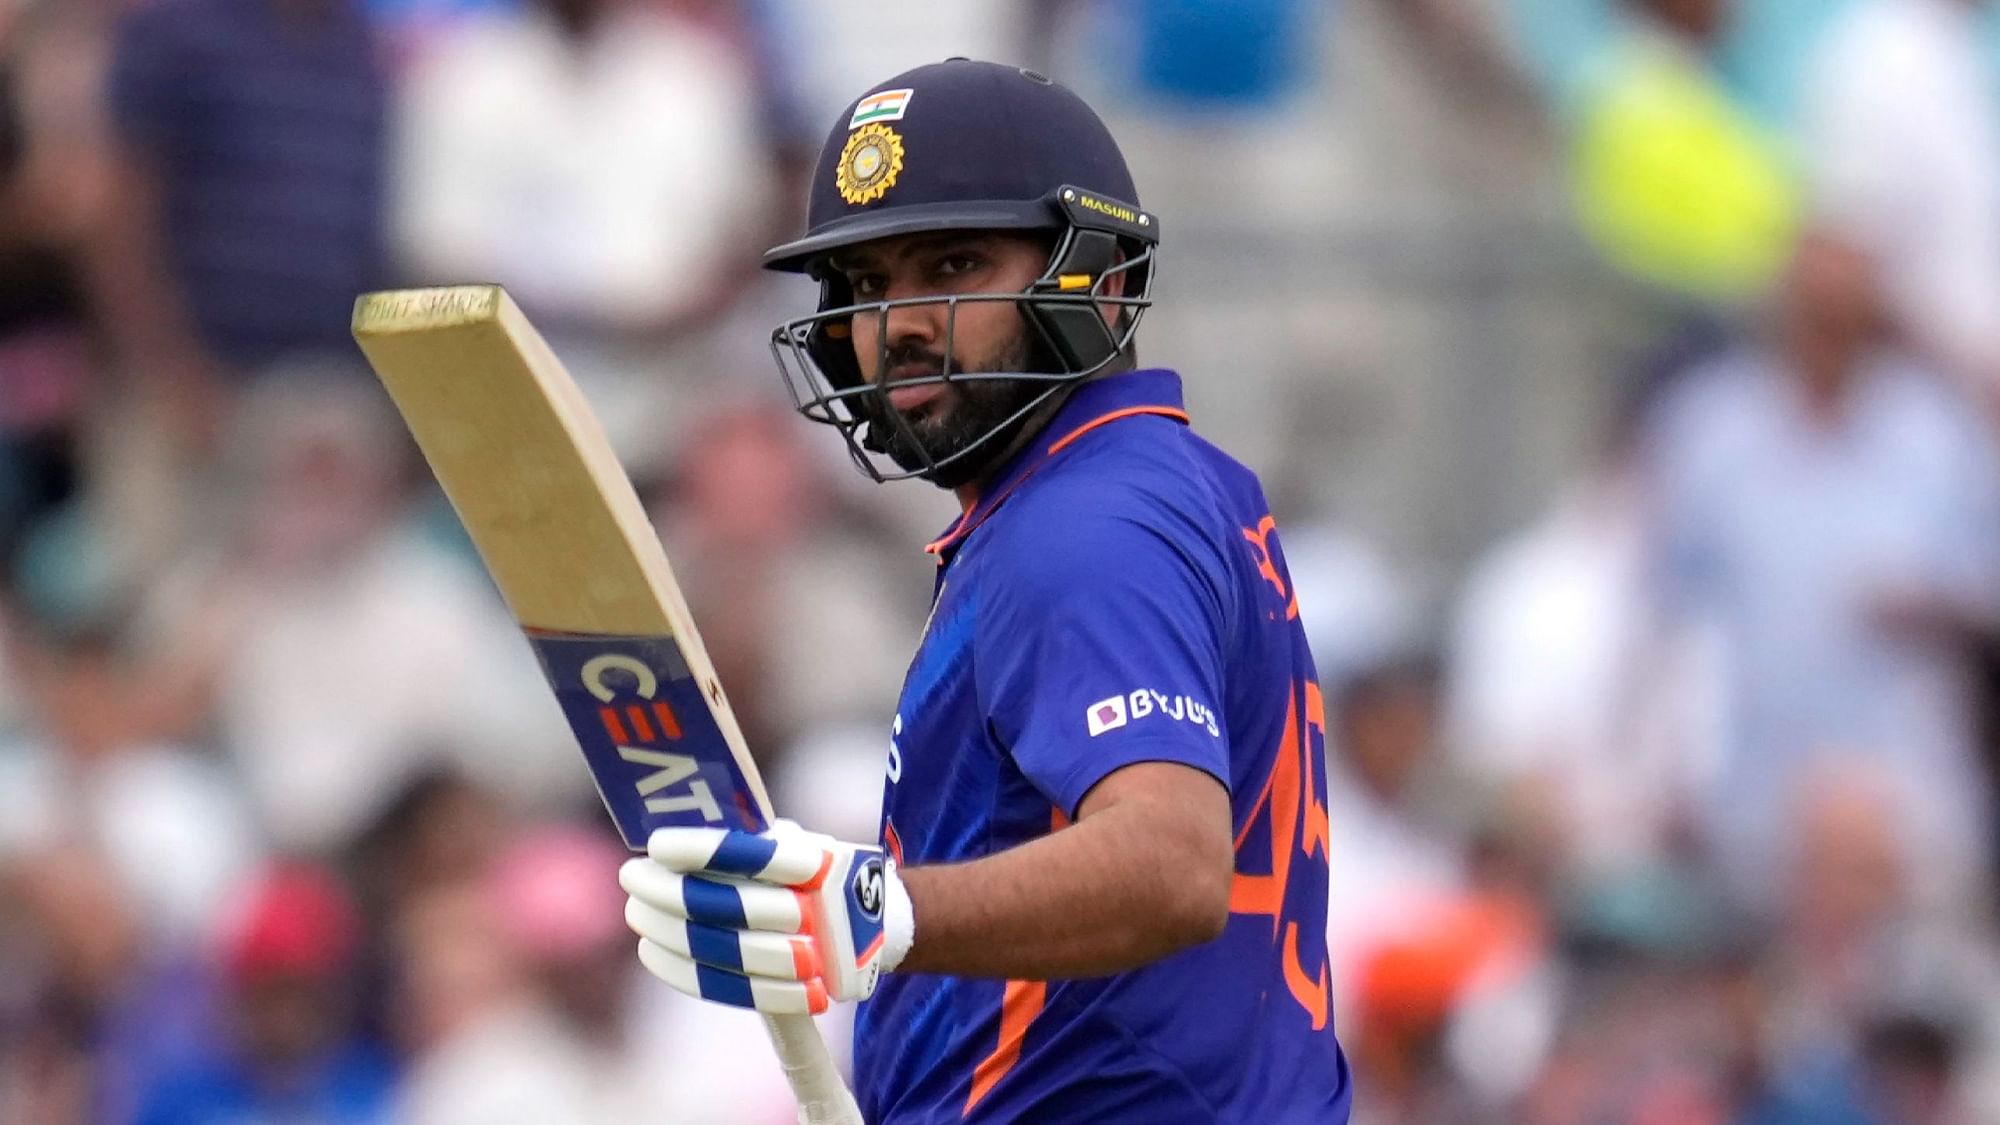 India vs England 2nd ODI 2022 Date, Time, Broadcast Channels, Live Streaming Website and App, Everything You Need To Know About the IND vs ENG 2nd ODI